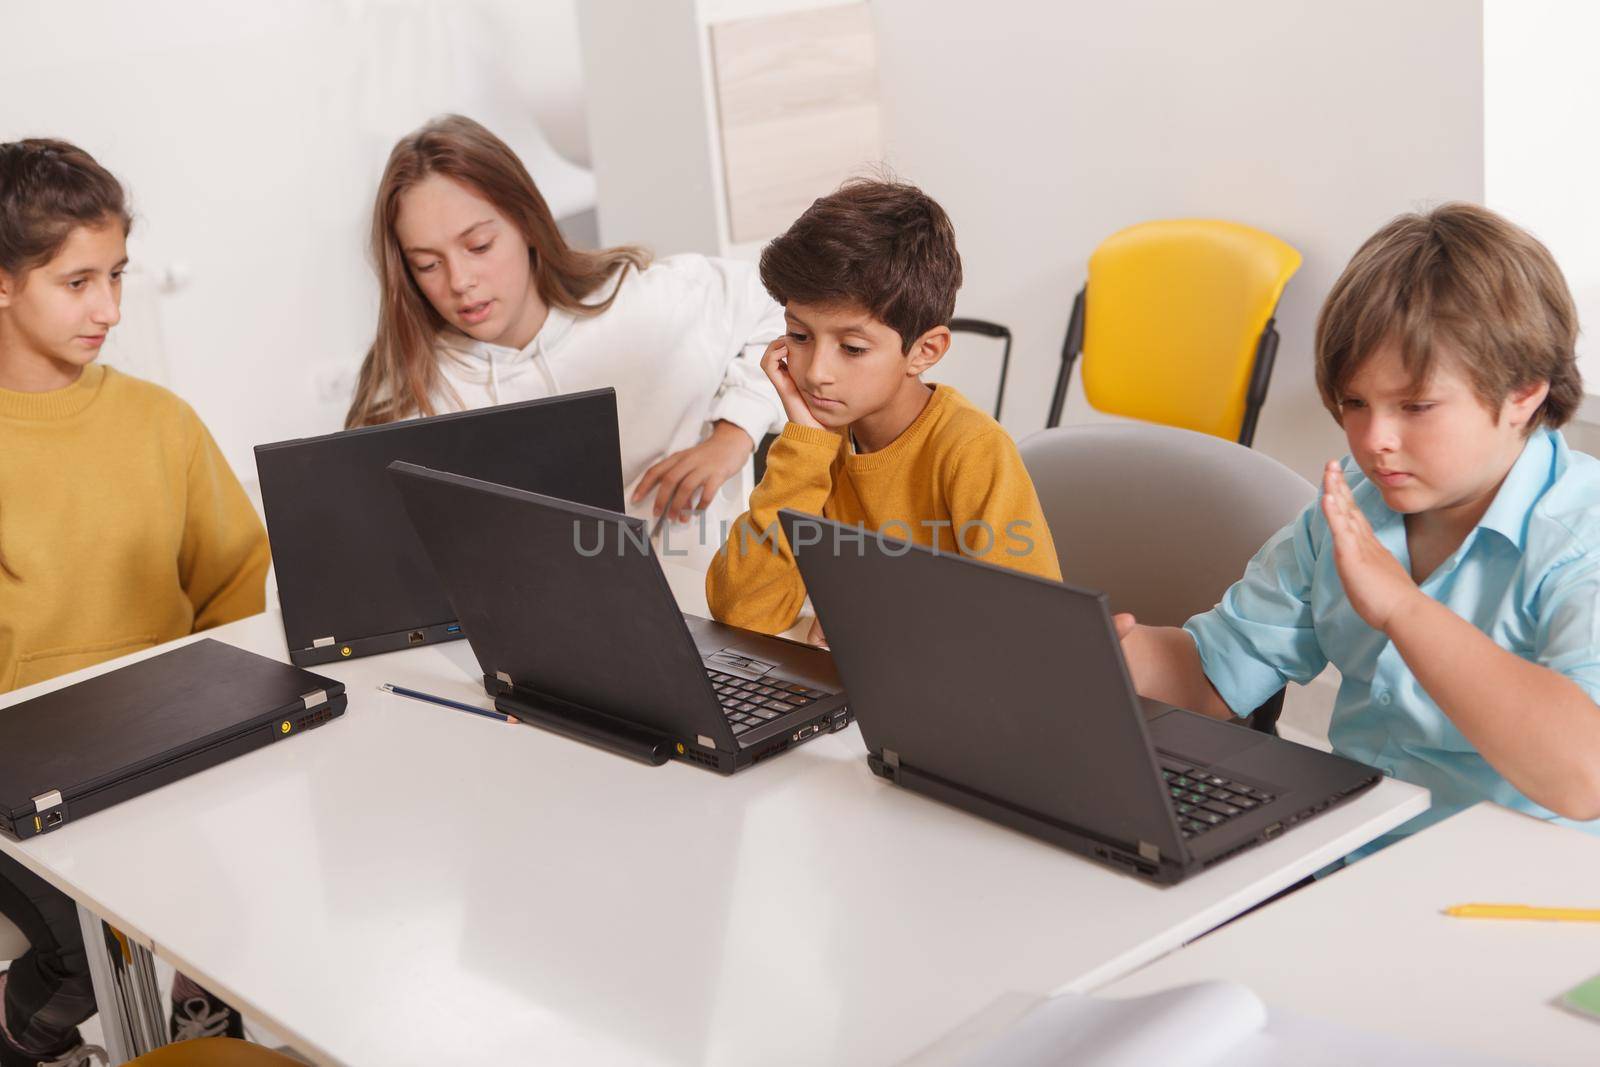 Group of kids using laptops, working on a school project